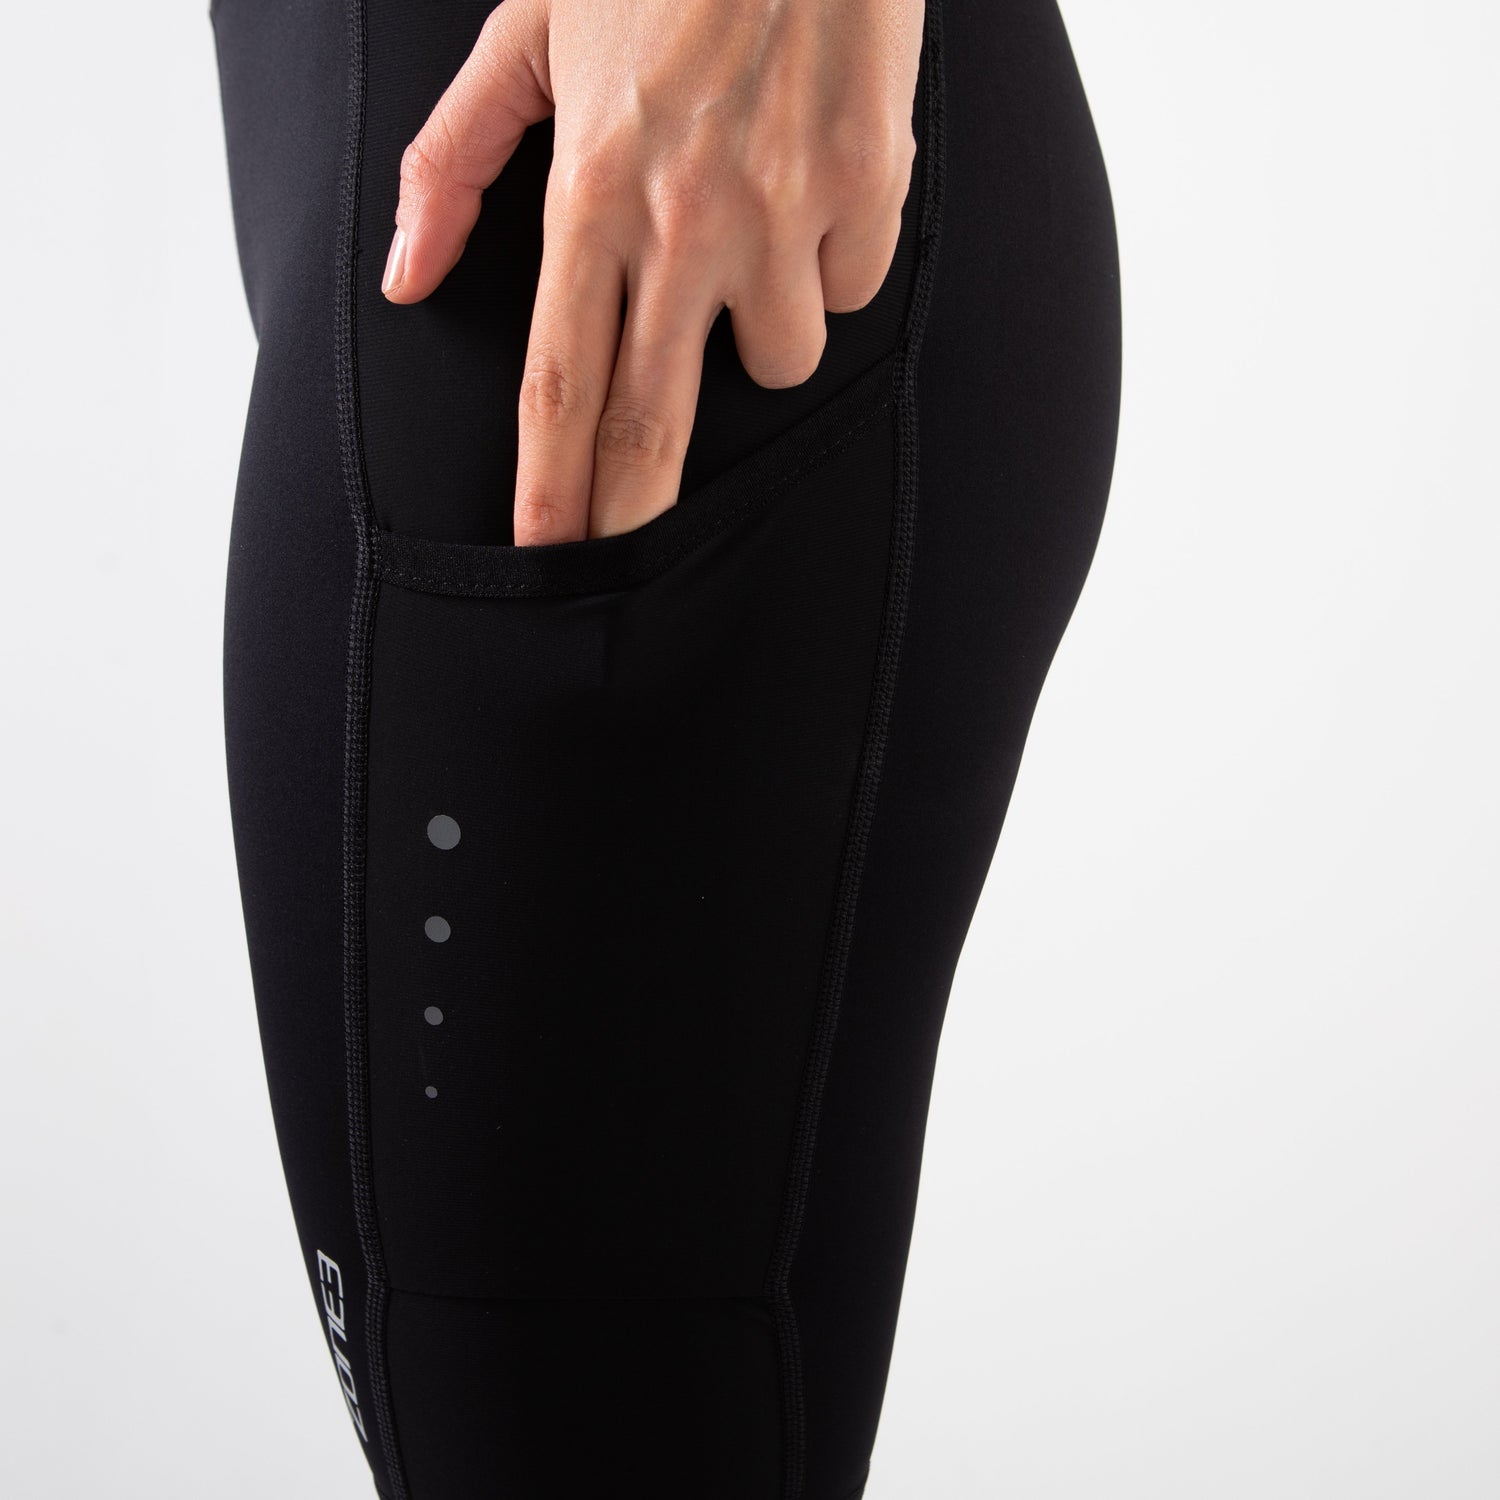 ZONE3 RX3 Medical Grade Compression 2-in-1 - Pants/Shorts Zone3 - The  widest selection! Best prices! - Bikes Online Shop